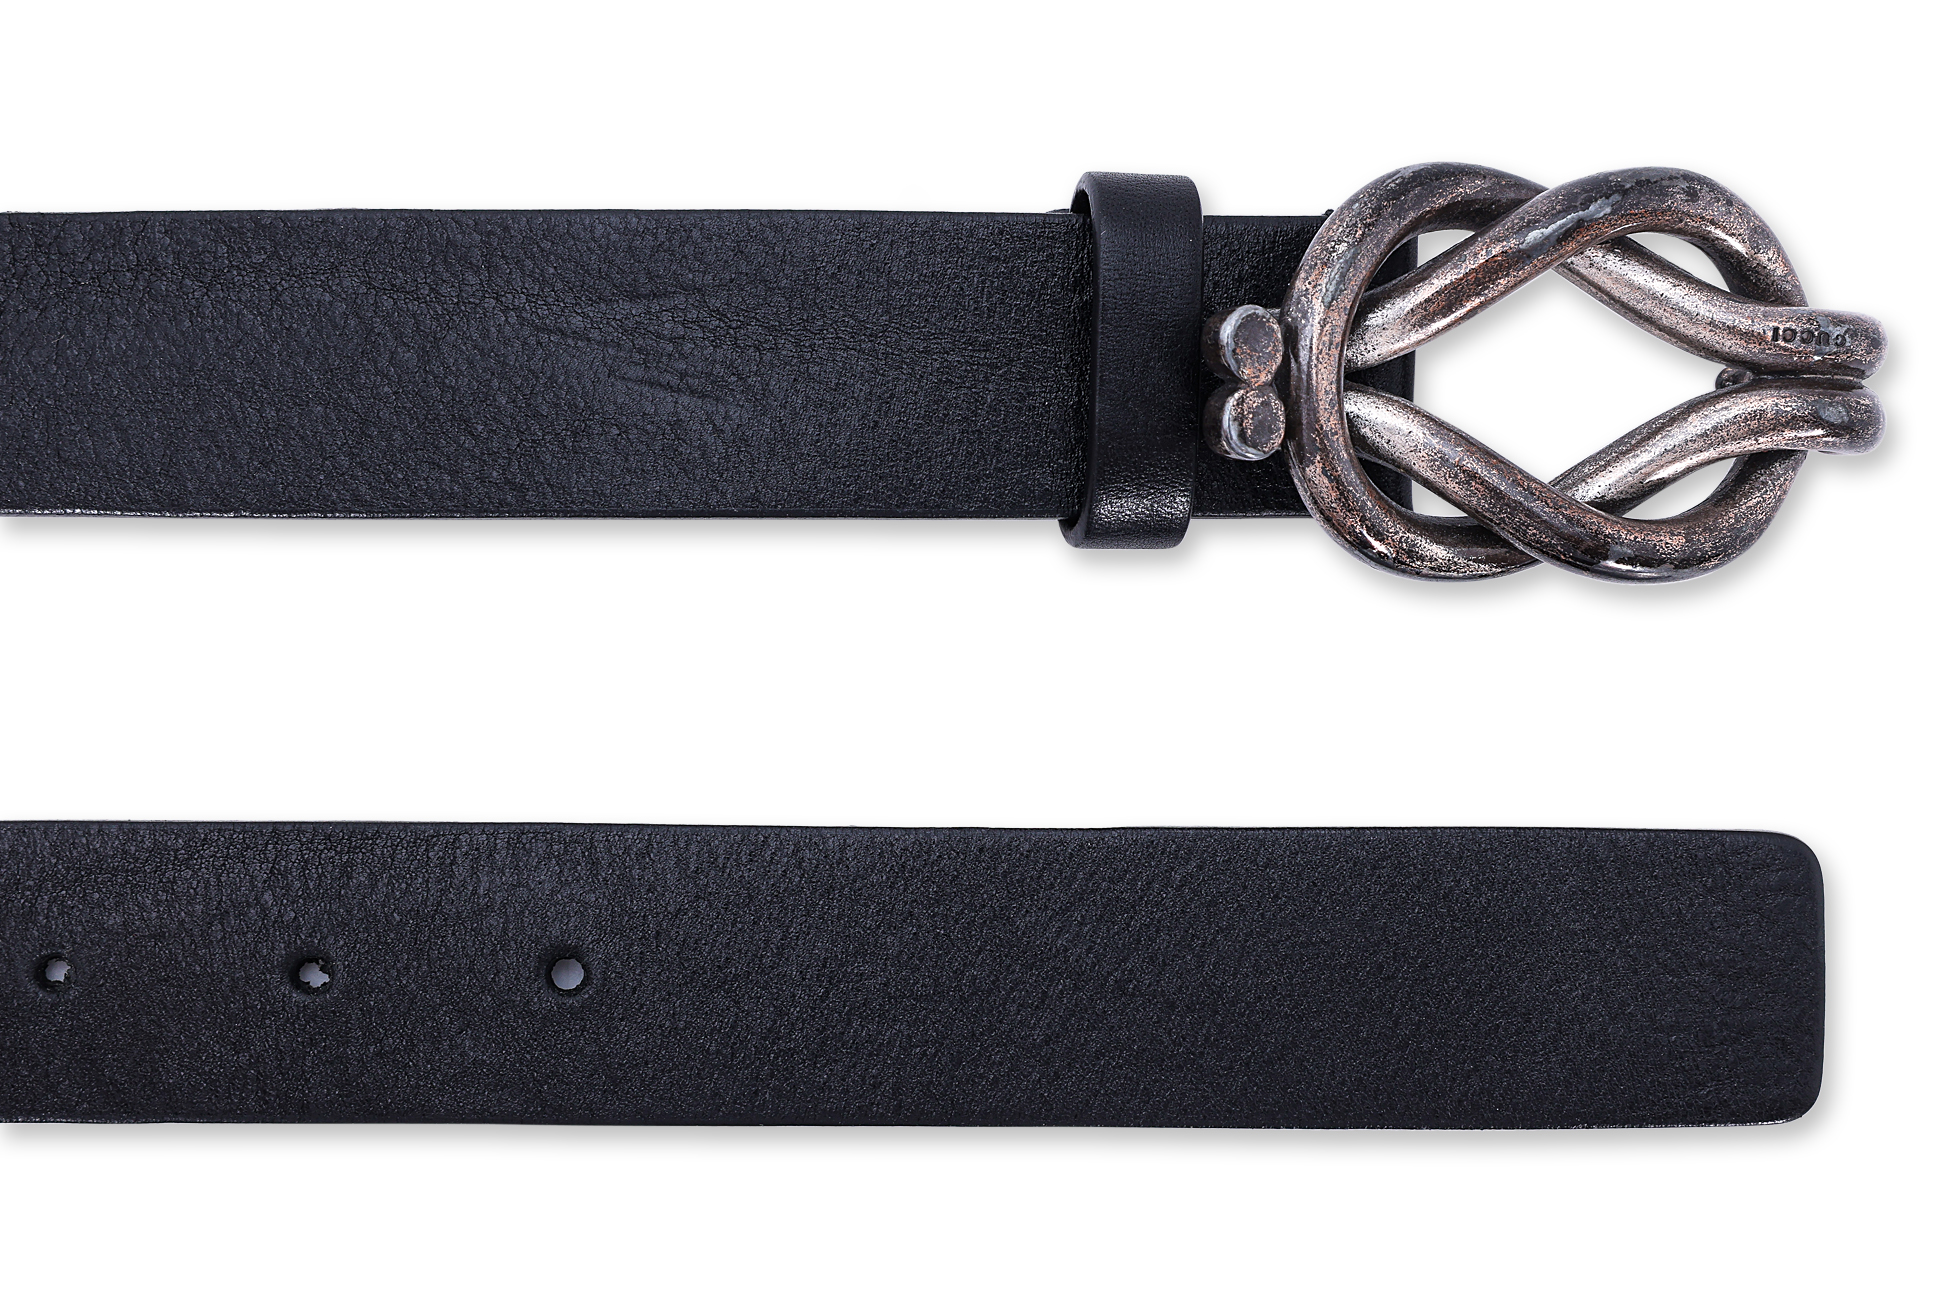 A GUCCI AND BVLGARI MEN'S LEATHER BELT - Image 3 of 3